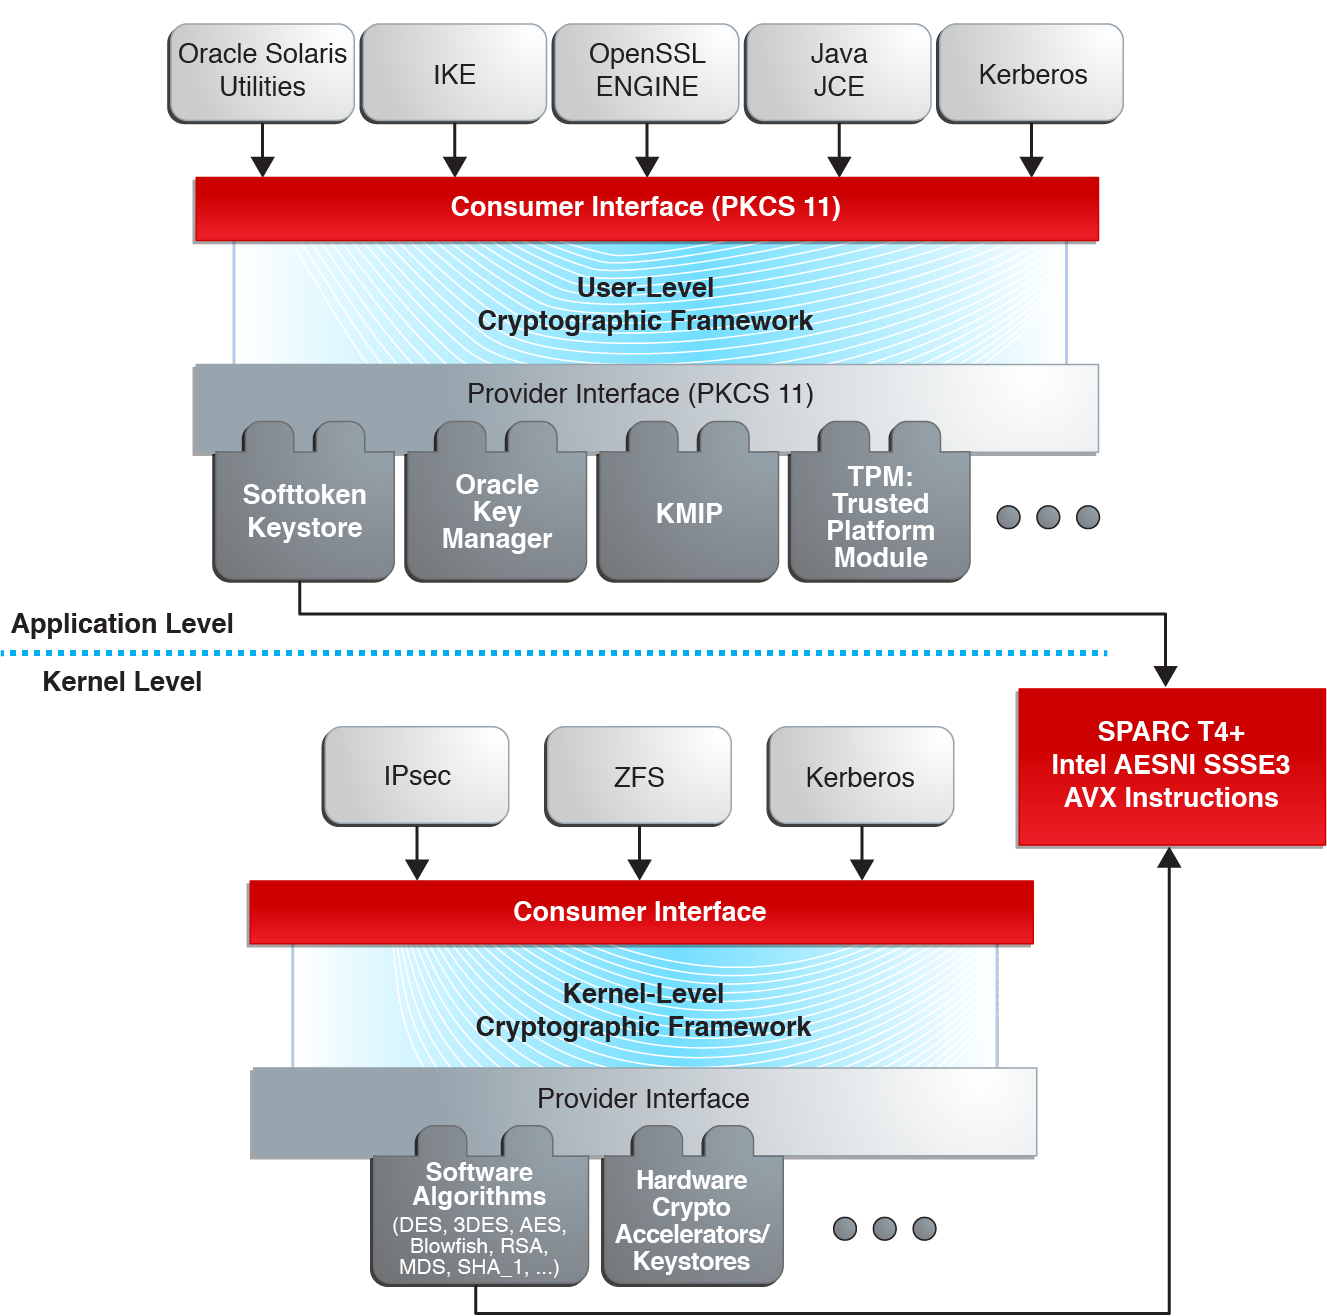 image:Diagram shows major elements in the Oracle Solaris Cryptographic Framework.